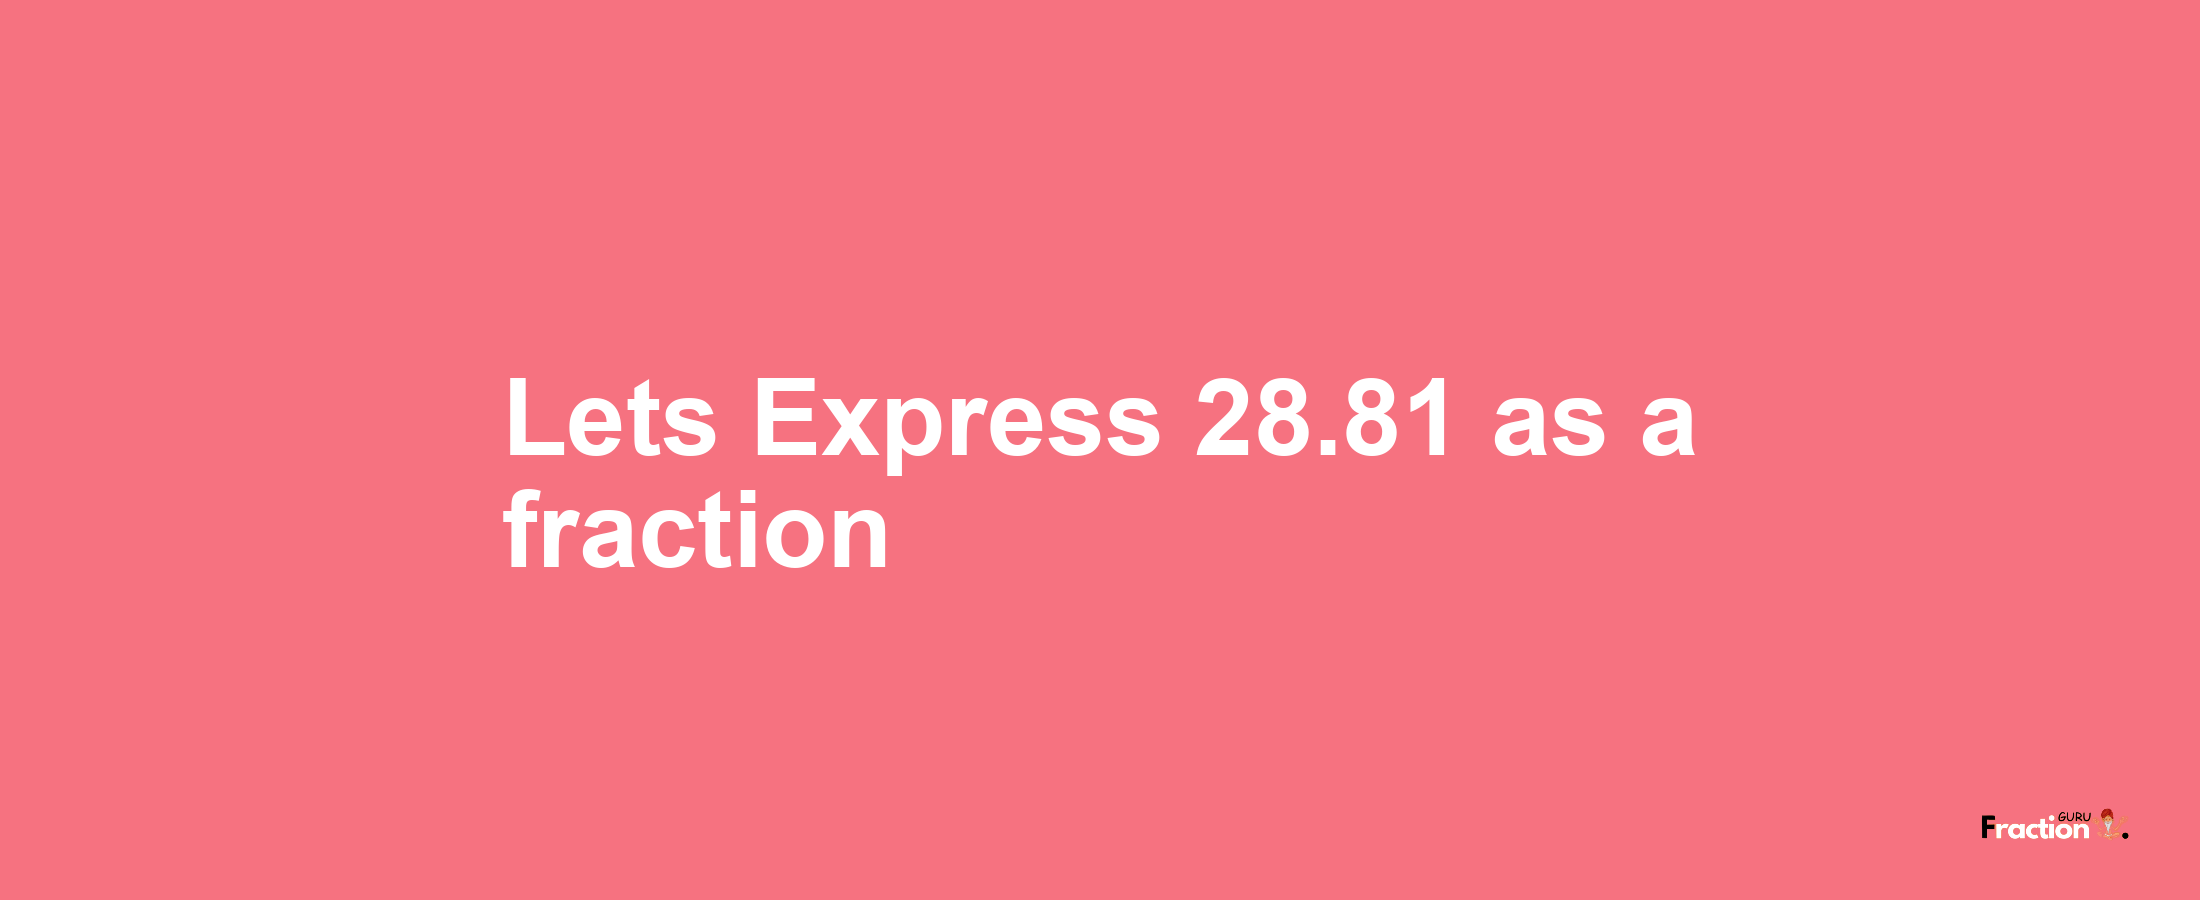 Lets Express 28.81 as afraction